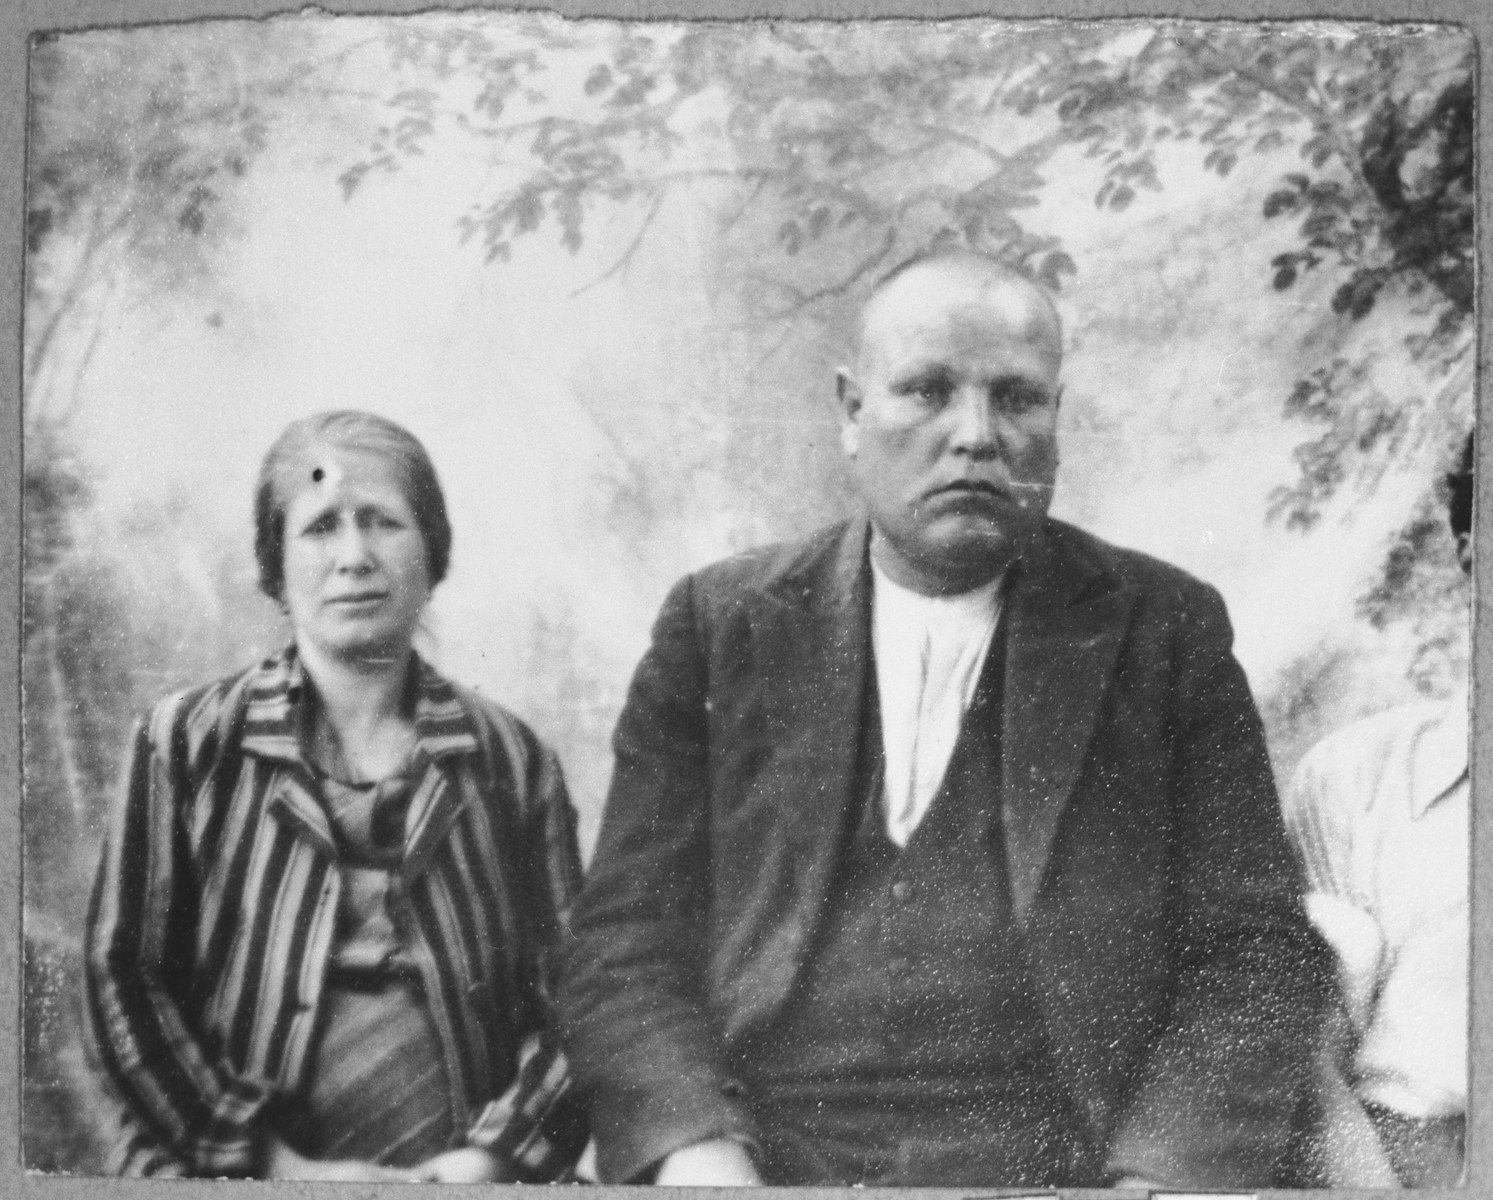 Portrait of Todoros Levi, son of Mair Levi, and Todoros' wife, Rekula.  Todoros was a rag dealer.  They lived at Zmayeva 5 in Bitola.